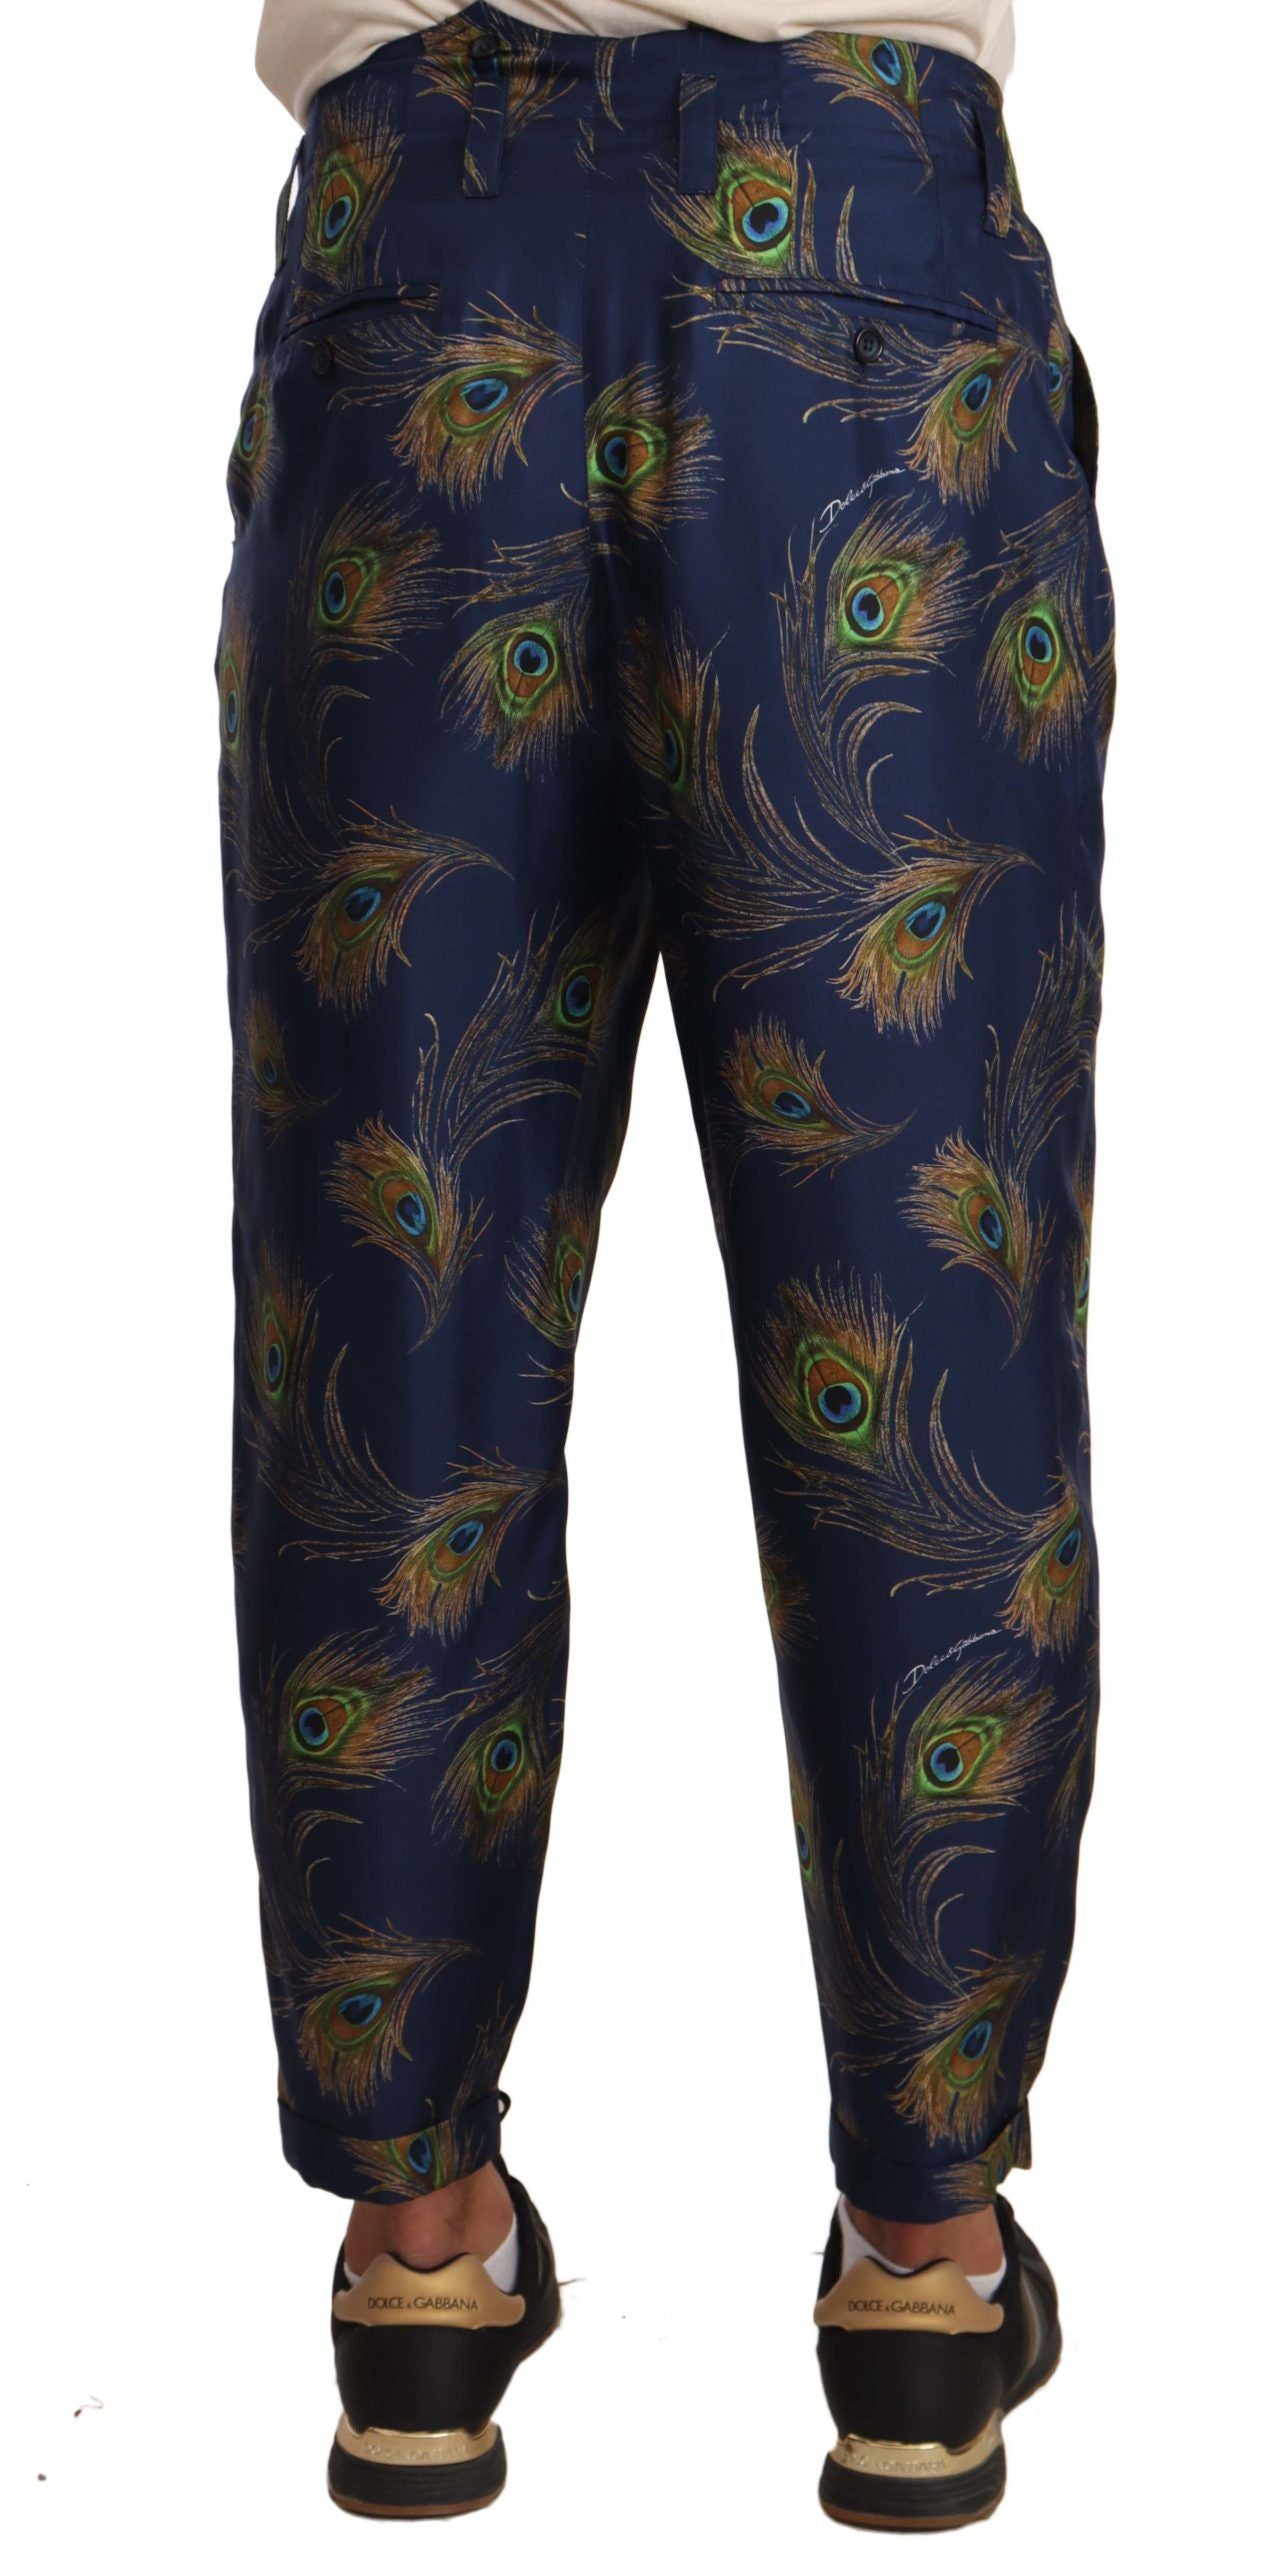 Dolce & Gabbana Exquisite Peacock Print Silk Trousers